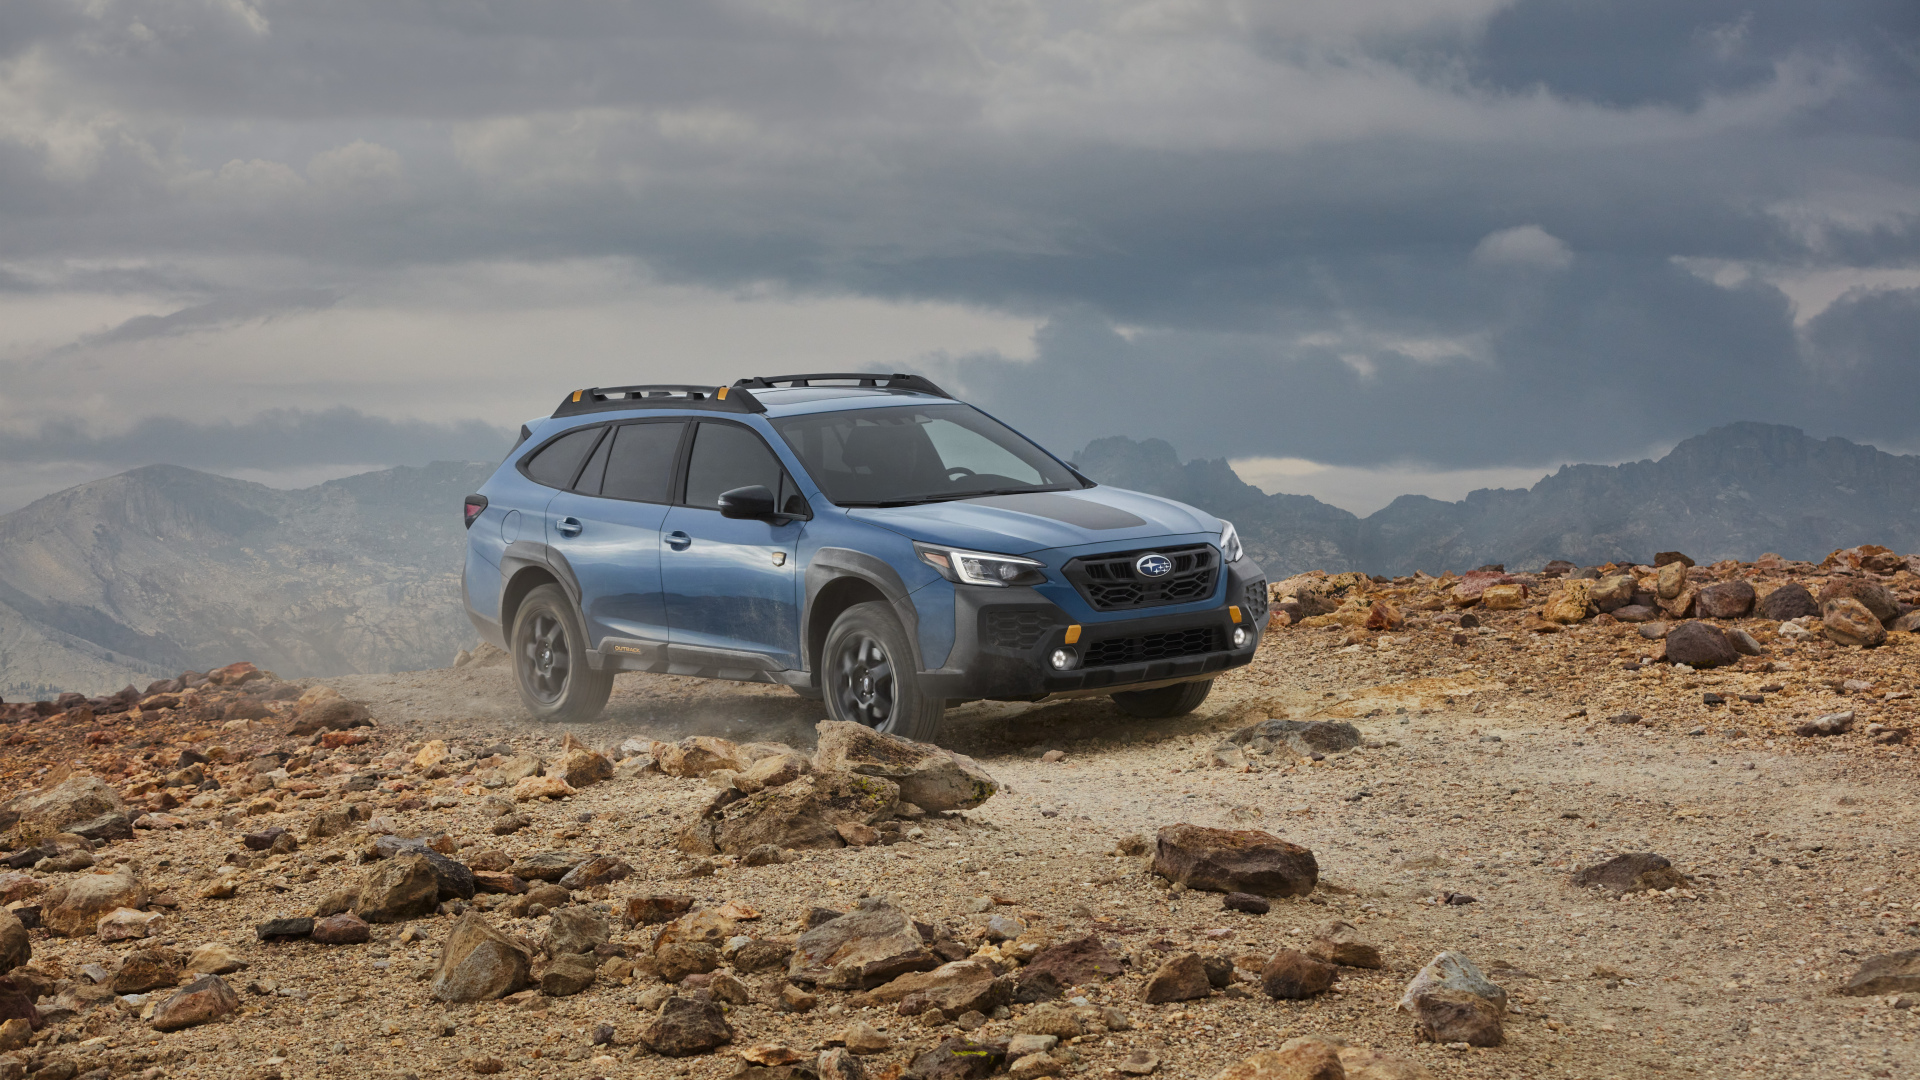 Built for Adventure: Understanding the Trim Options of the Subaru Outback Wilderness